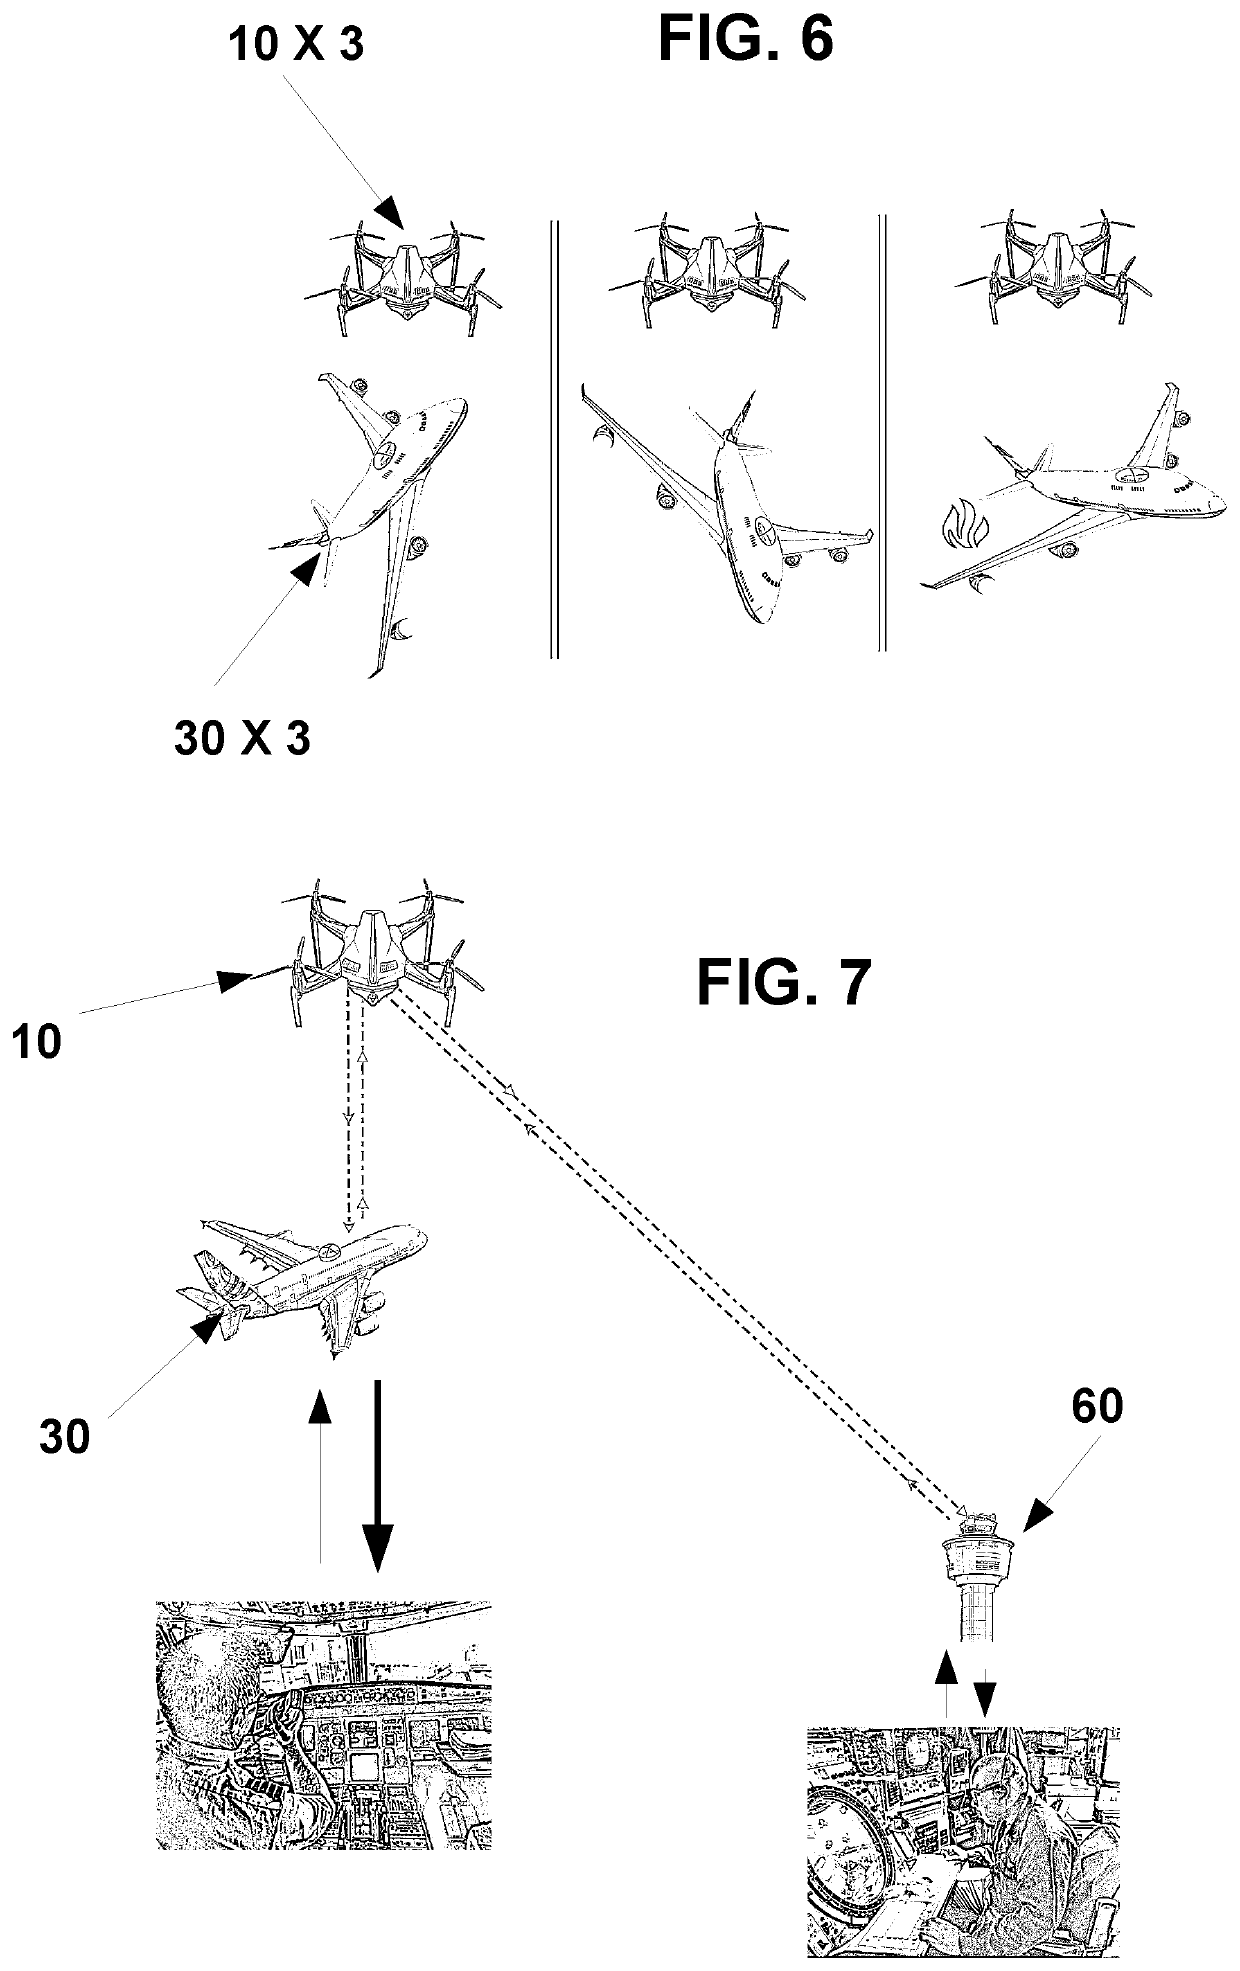 On-board emergency remote assistance and data retrievable system for an aerial vehicle